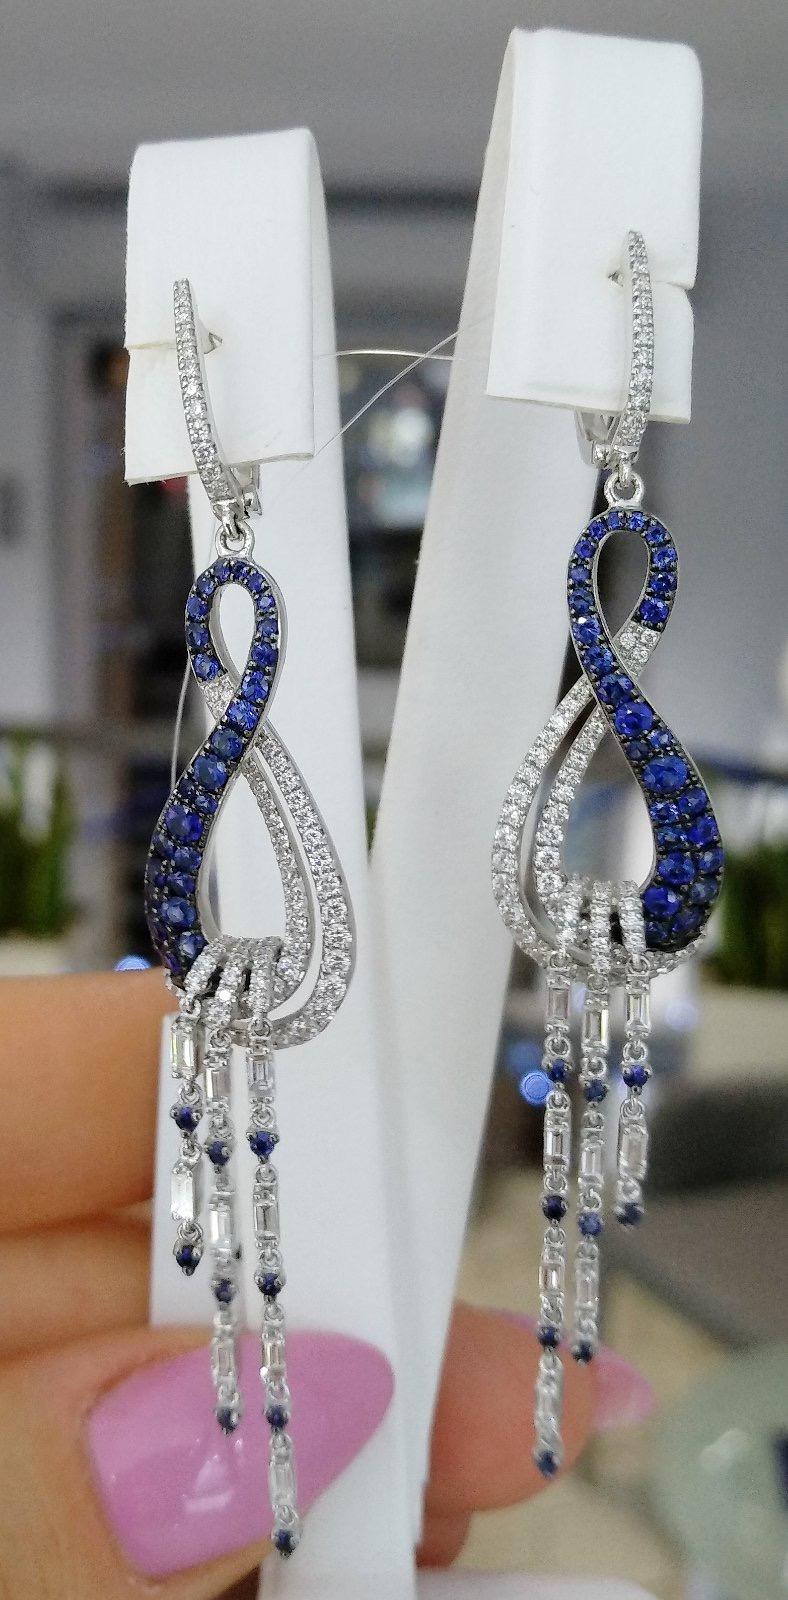 White Gold 14K Earrings (Matching Ring Available)
Weight 7.55 gram
Diamond 134-Round 57-0,67-4/5A
Diamond 74-Round-1,32 Т(3)/2A
Blue Sapphire  74-Roundг-1,32 Т(3)/2A

With a heritage of ancient fine Swiss jewelry traditions, NATKINA is a Geneva